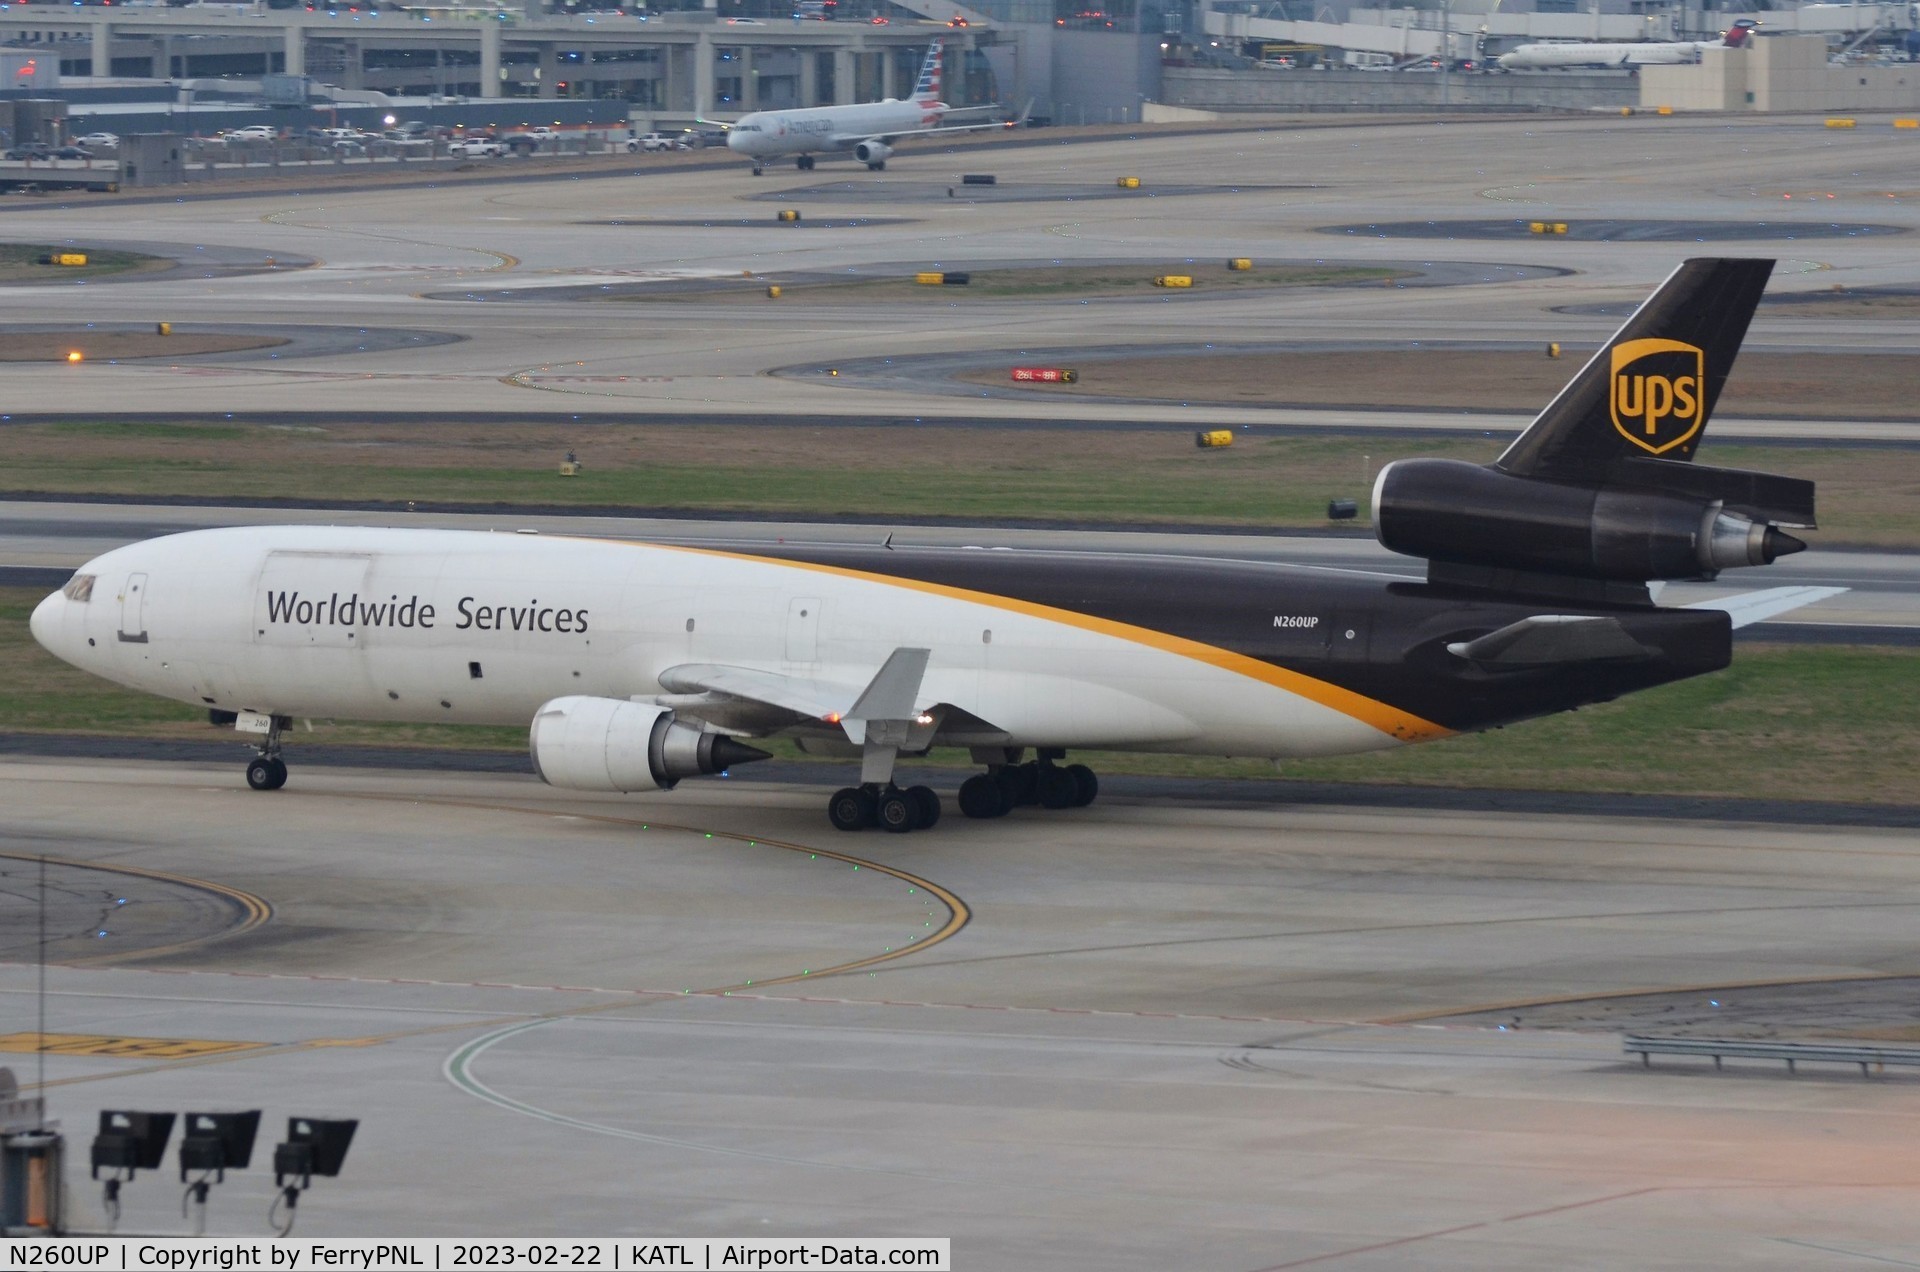 N260UP, 1992 McDonnell Douglas MD-11F C/N 48418, UPS MD11F taxying to its ramp